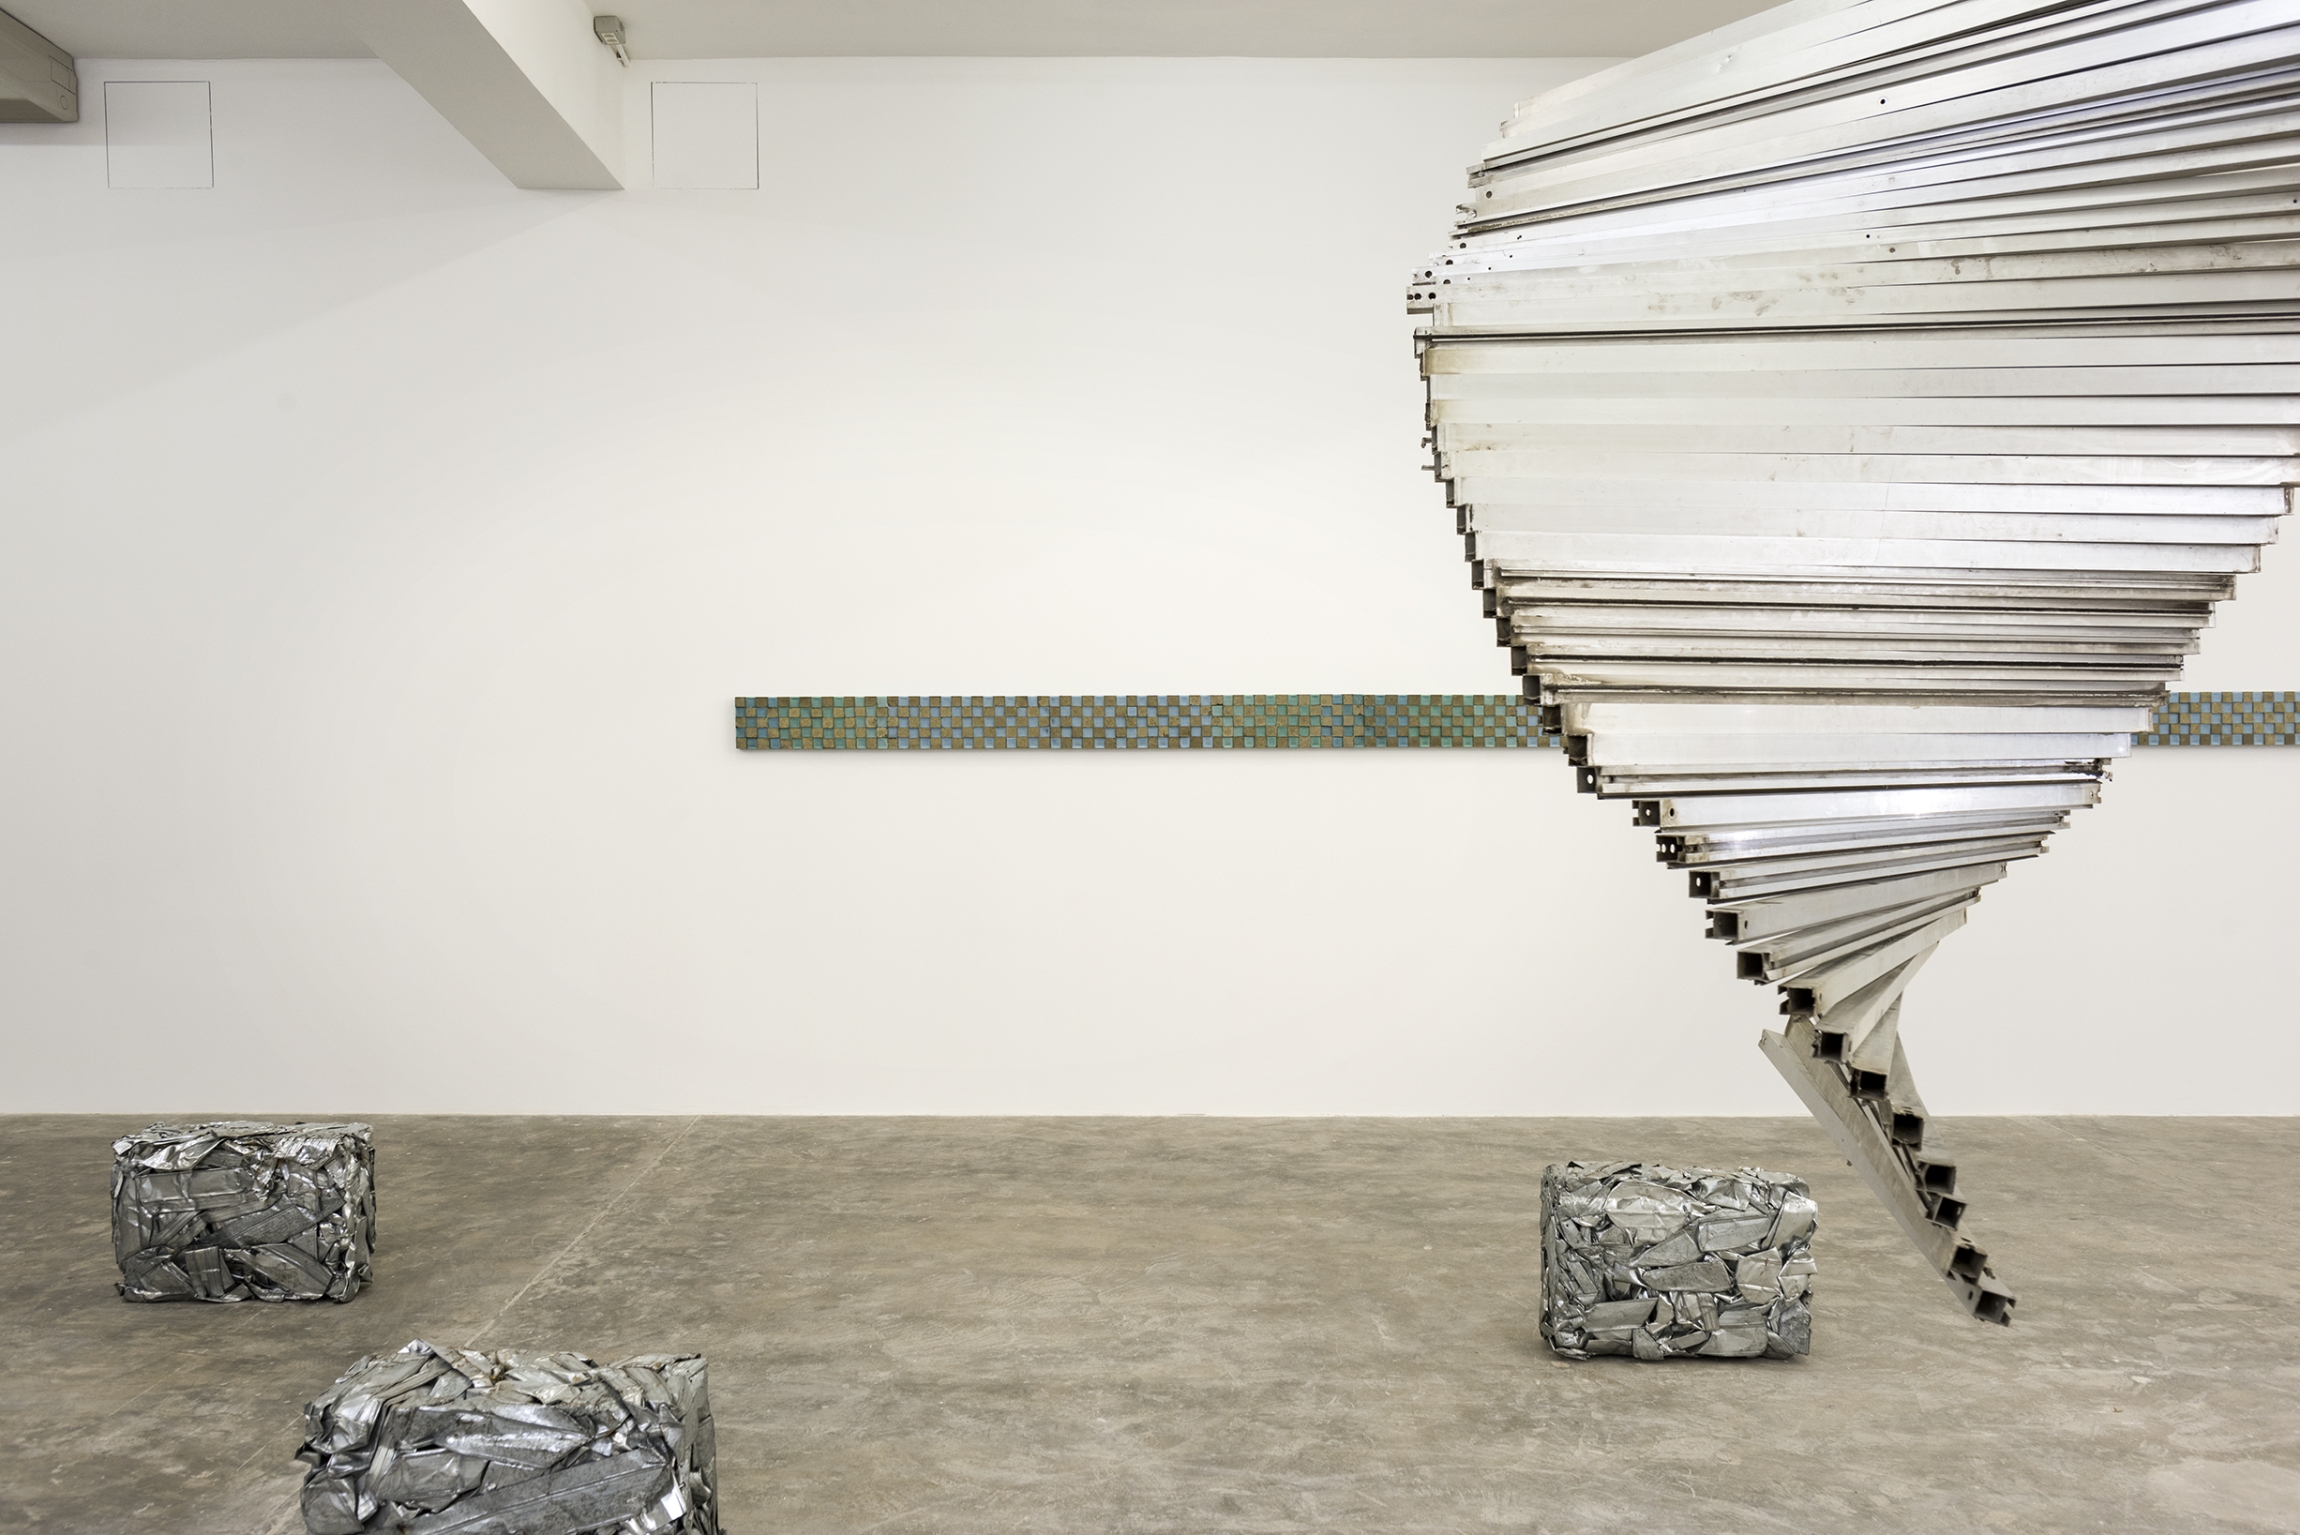 Marwan Rechmaoui, But the trees kept voting for the axe., Exhibition view, Sfeir-Semler Gallery Beirut, 2021